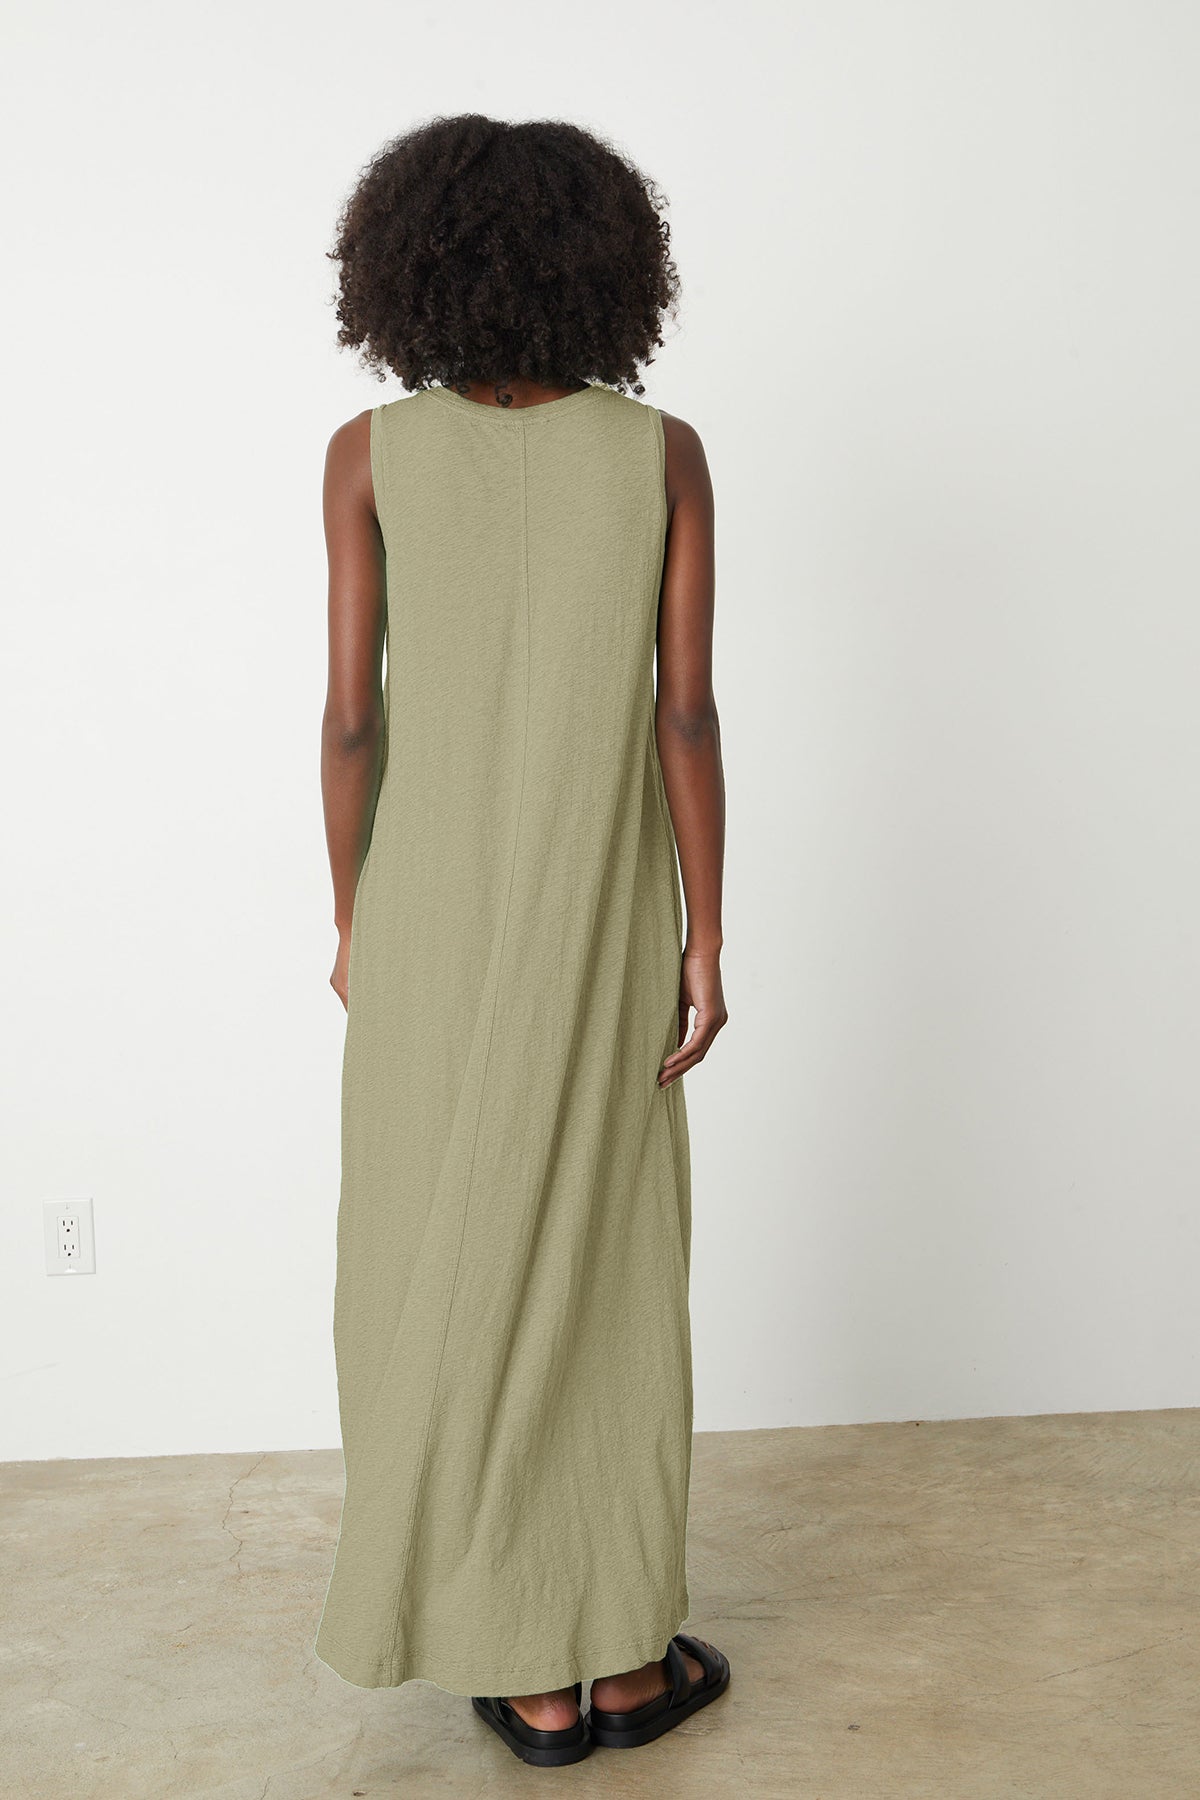 the back view of a woman wearing an EDITH SLEEVELESS MAXI DRESS by Velvet by Graham & Spencer.-26342821986497